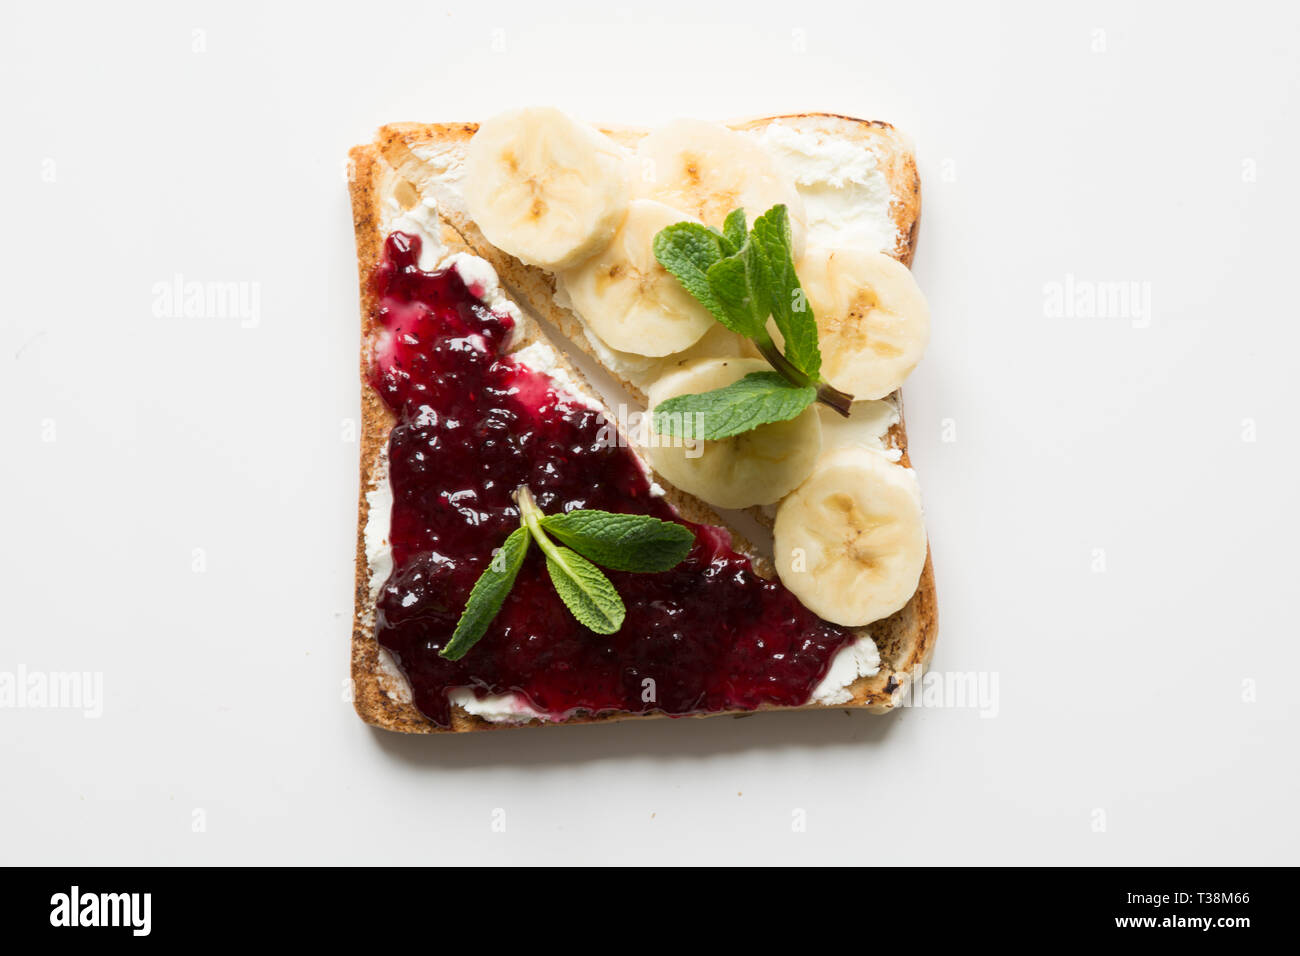 Different types of sandwiches for healthy children's breakfast without sugar, with berry jam, bananas. View from above. Stock Photo